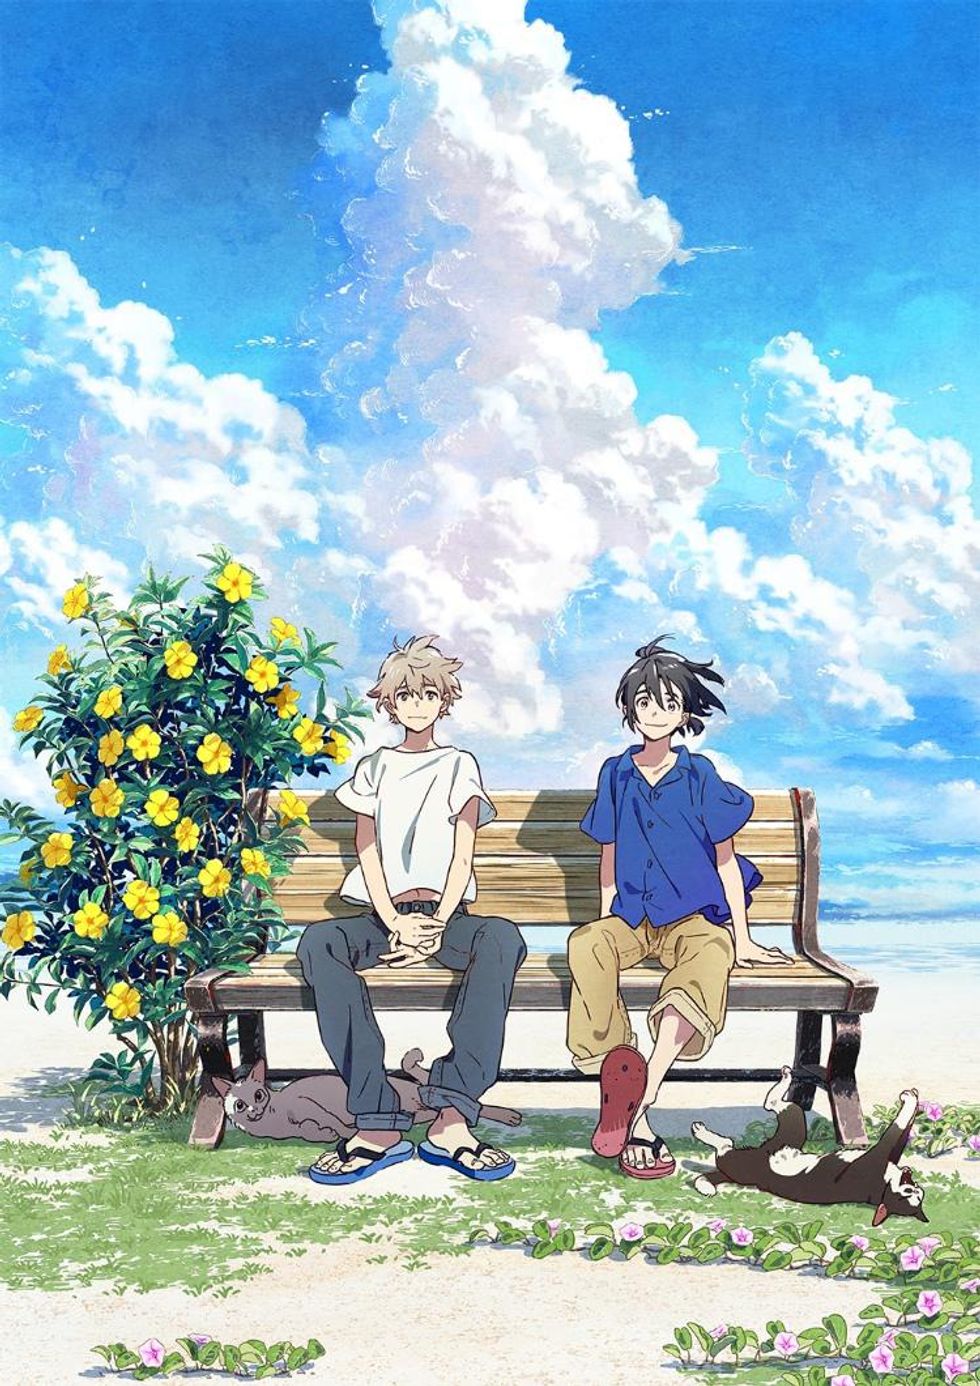 This Gay Romance Anime Is Coming to the . & We're Already Emotional